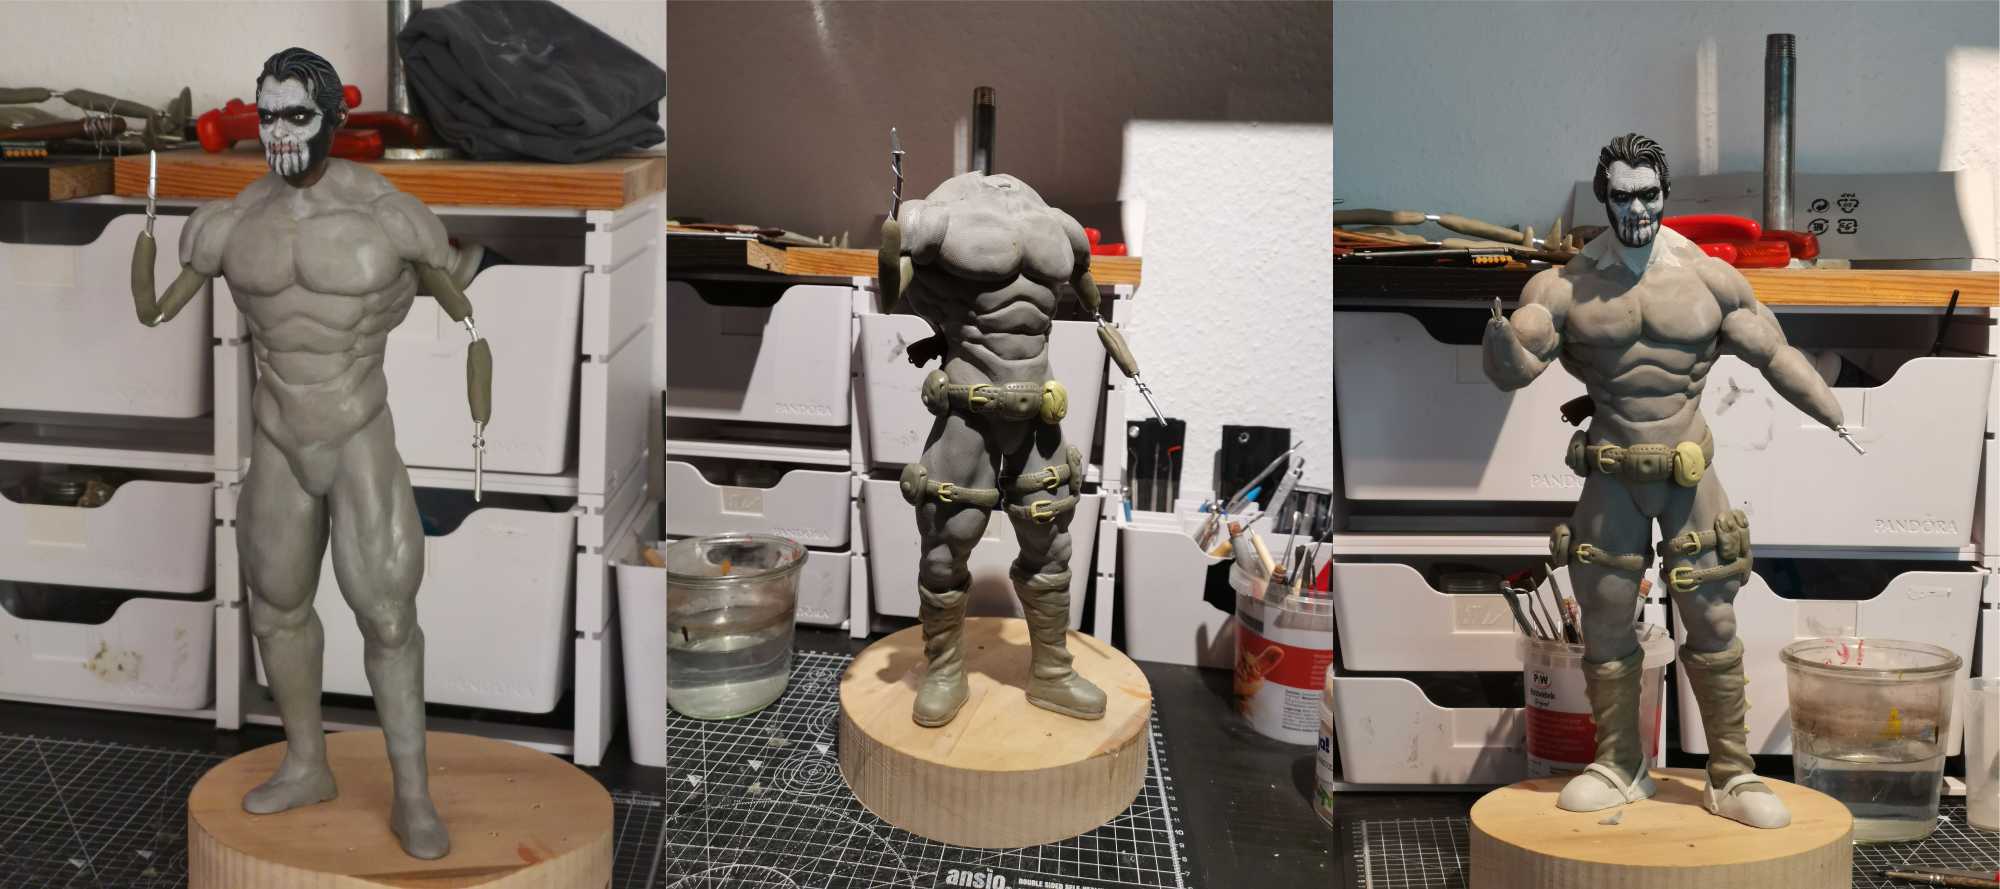 The Punisher - Sculpting Body